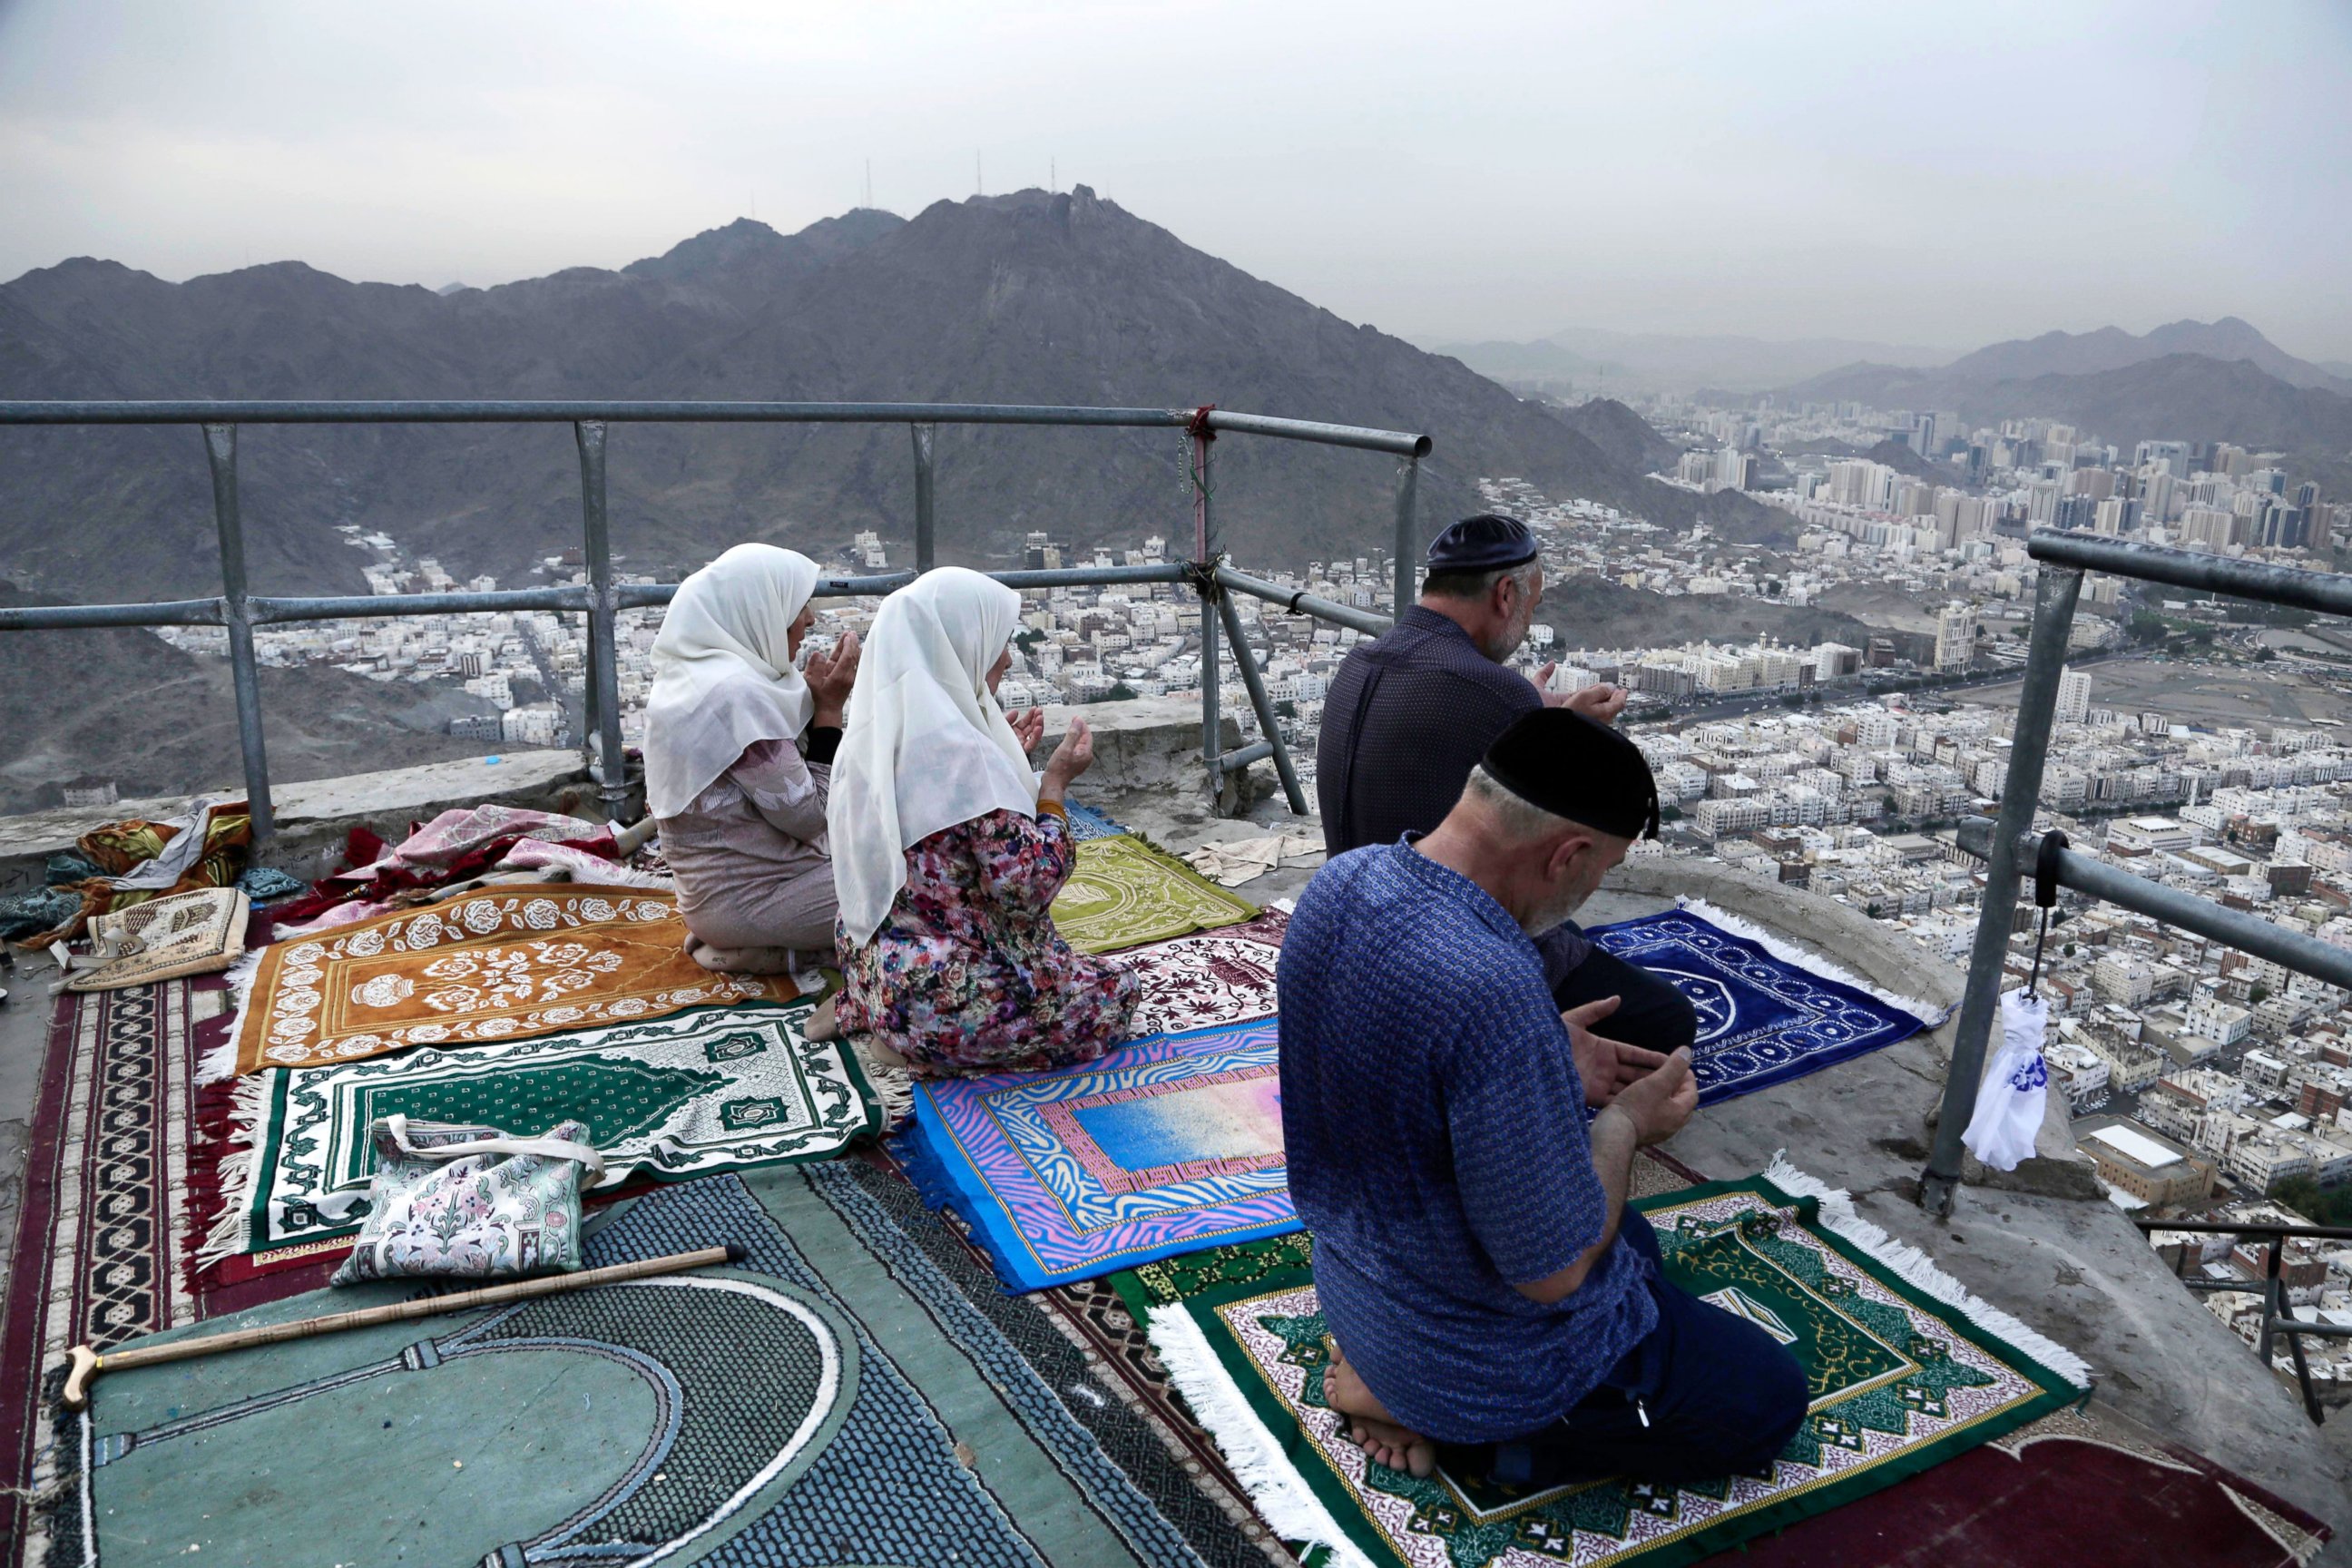 PHOTO: Chechens pray atop of Noor Mountain, where Prophet Muhammad received his first revelation from God to preach Islam, as Egyptians at right watch the view, on the outskirts of Mecca, Saudi Arabia, Sept. 9, 2016.